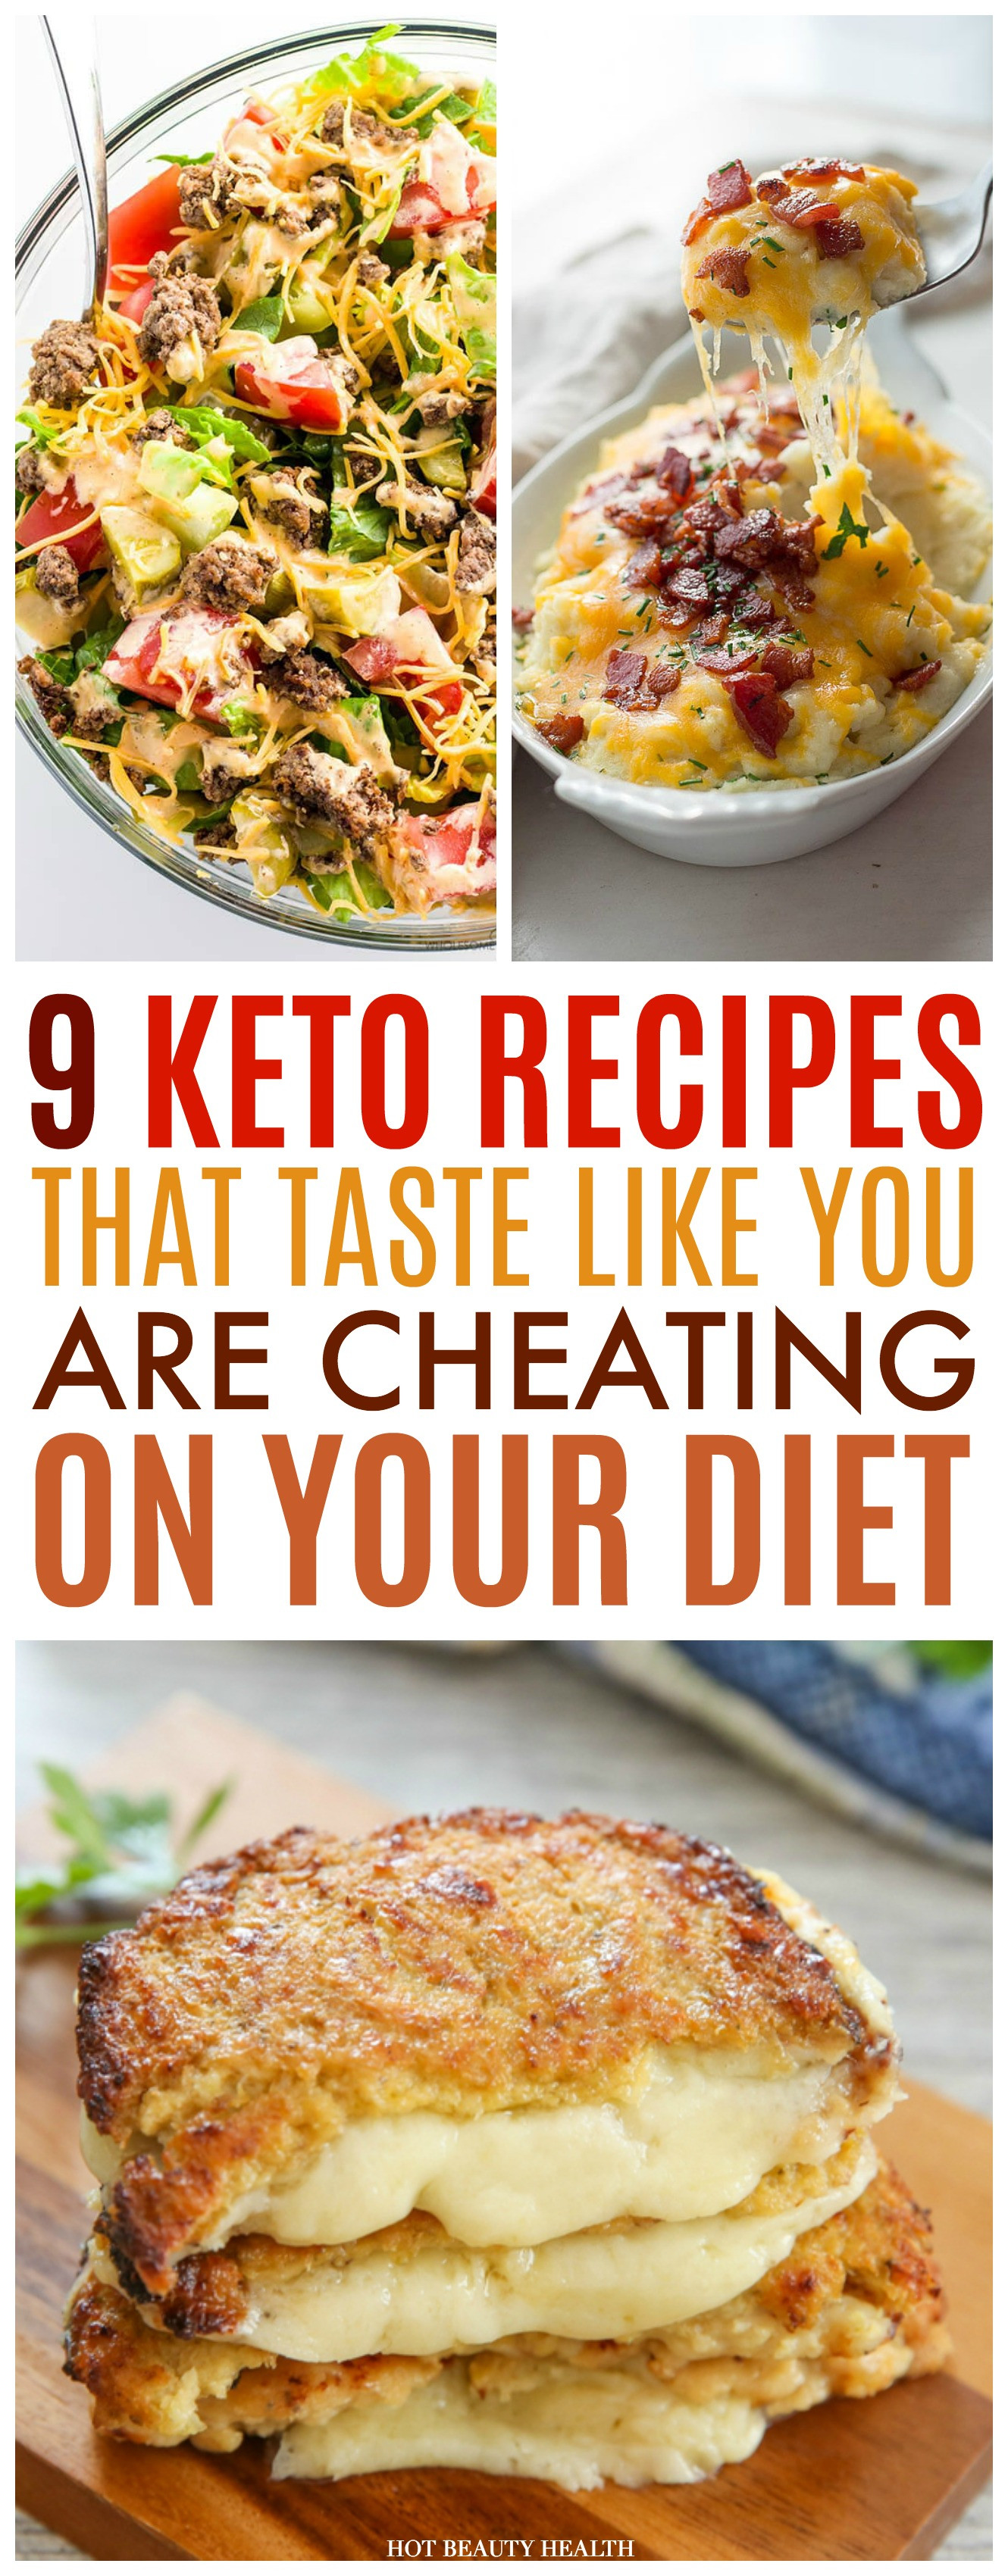 Keto Diet Breakfast Recipes
 9 Ketogenic Recipes For Anyone a Low Carb Diet Hot